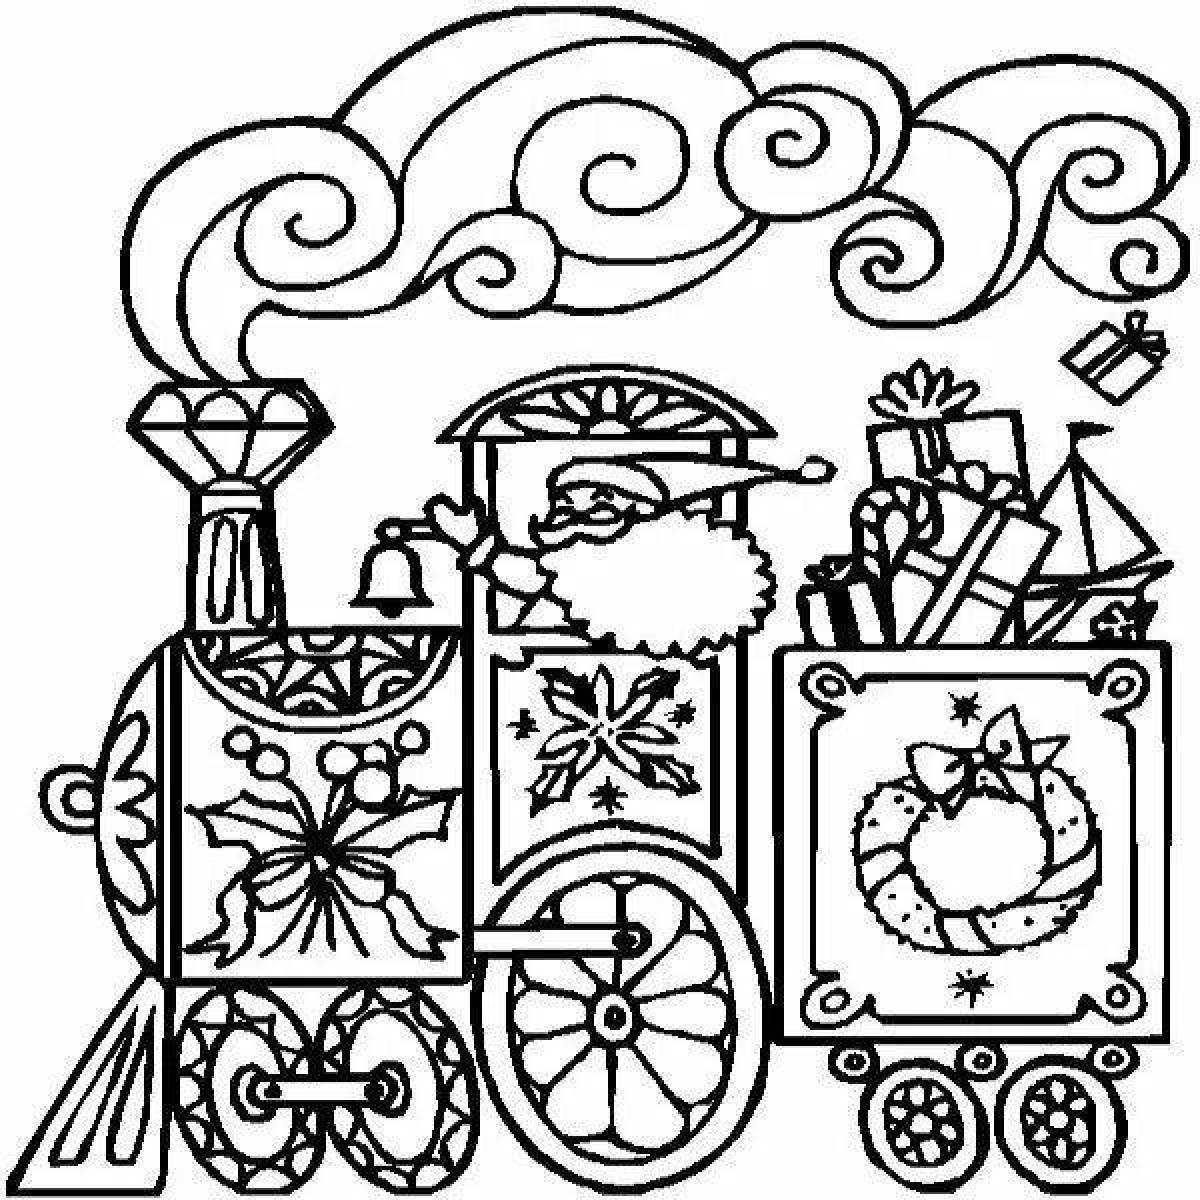 Coloring book festive New Year's train